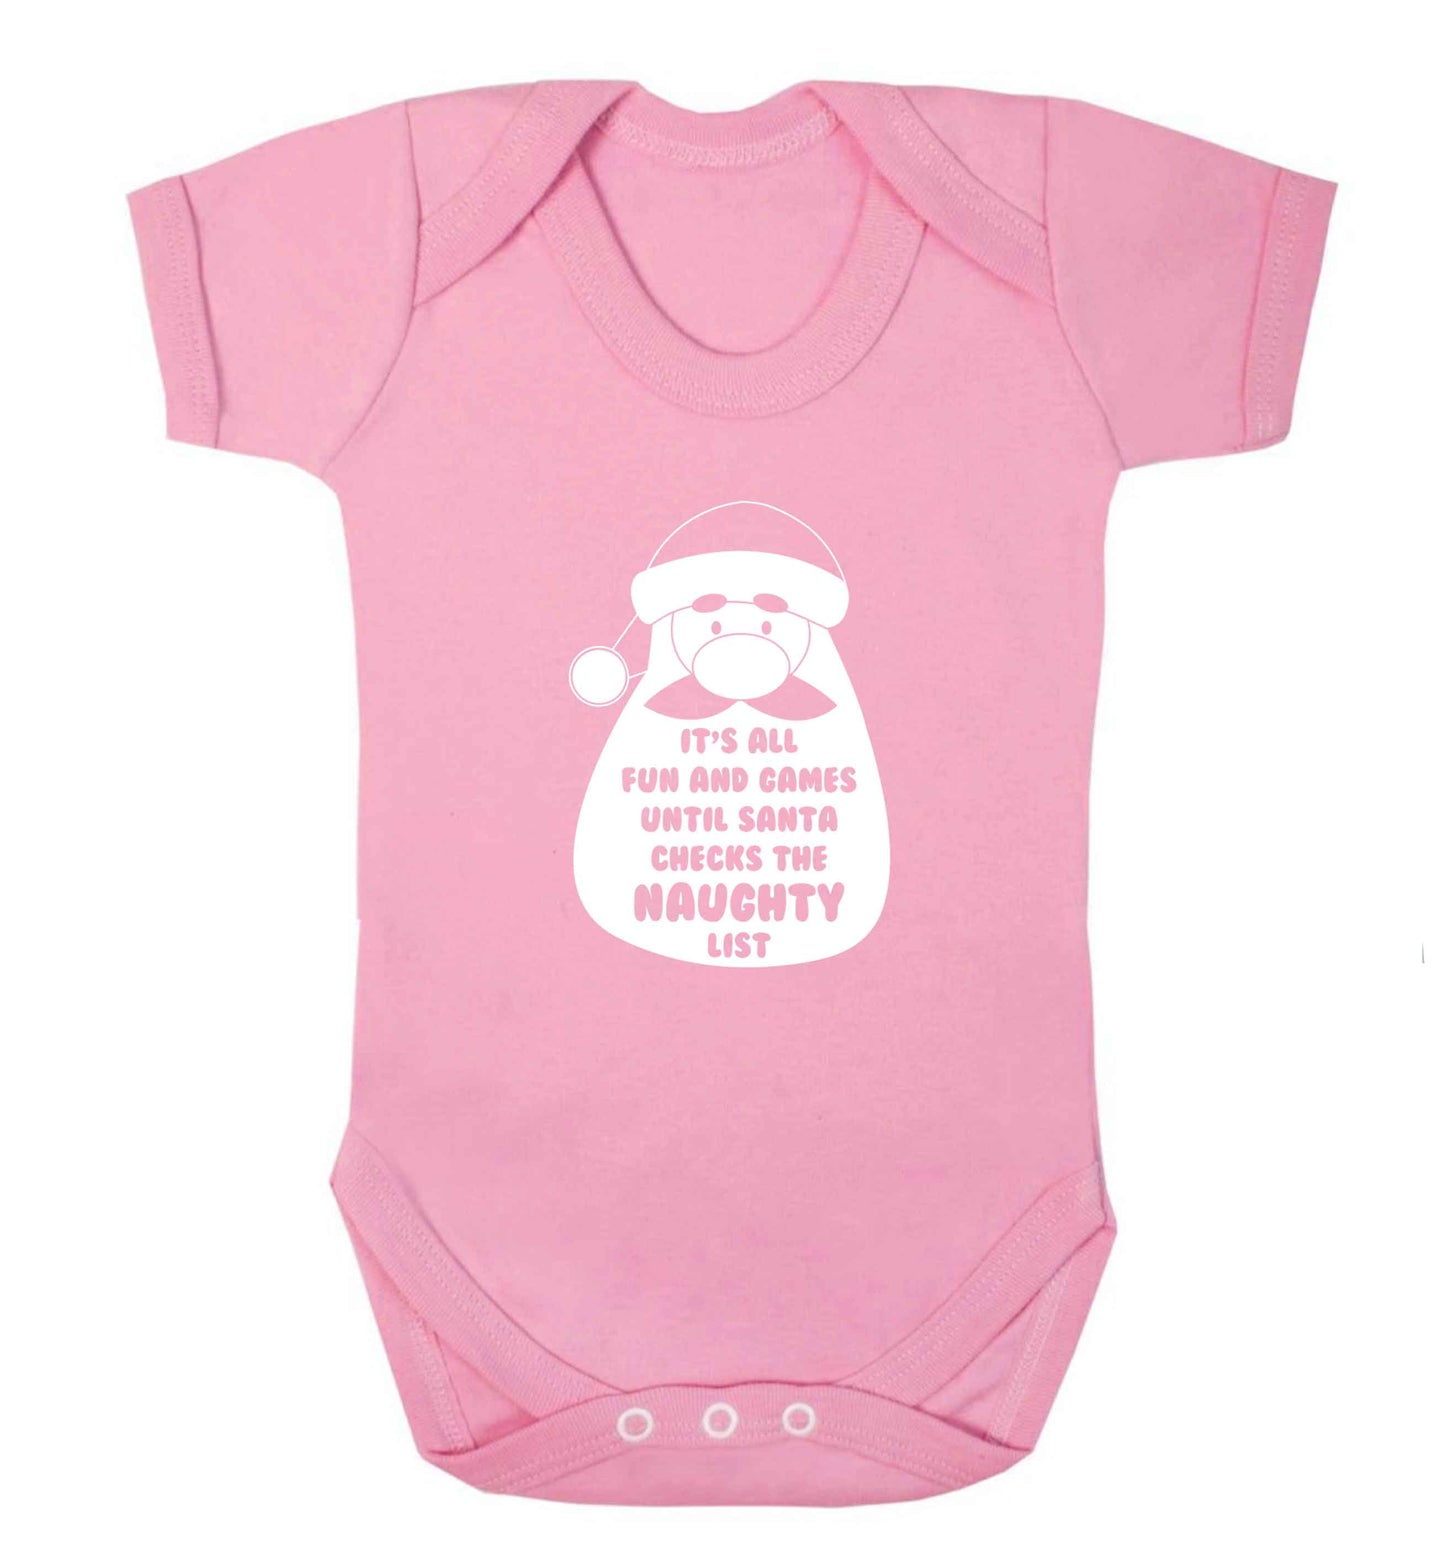 It's all fun and games until Santa checks the naughty list baby vest pale pink 18-24 months